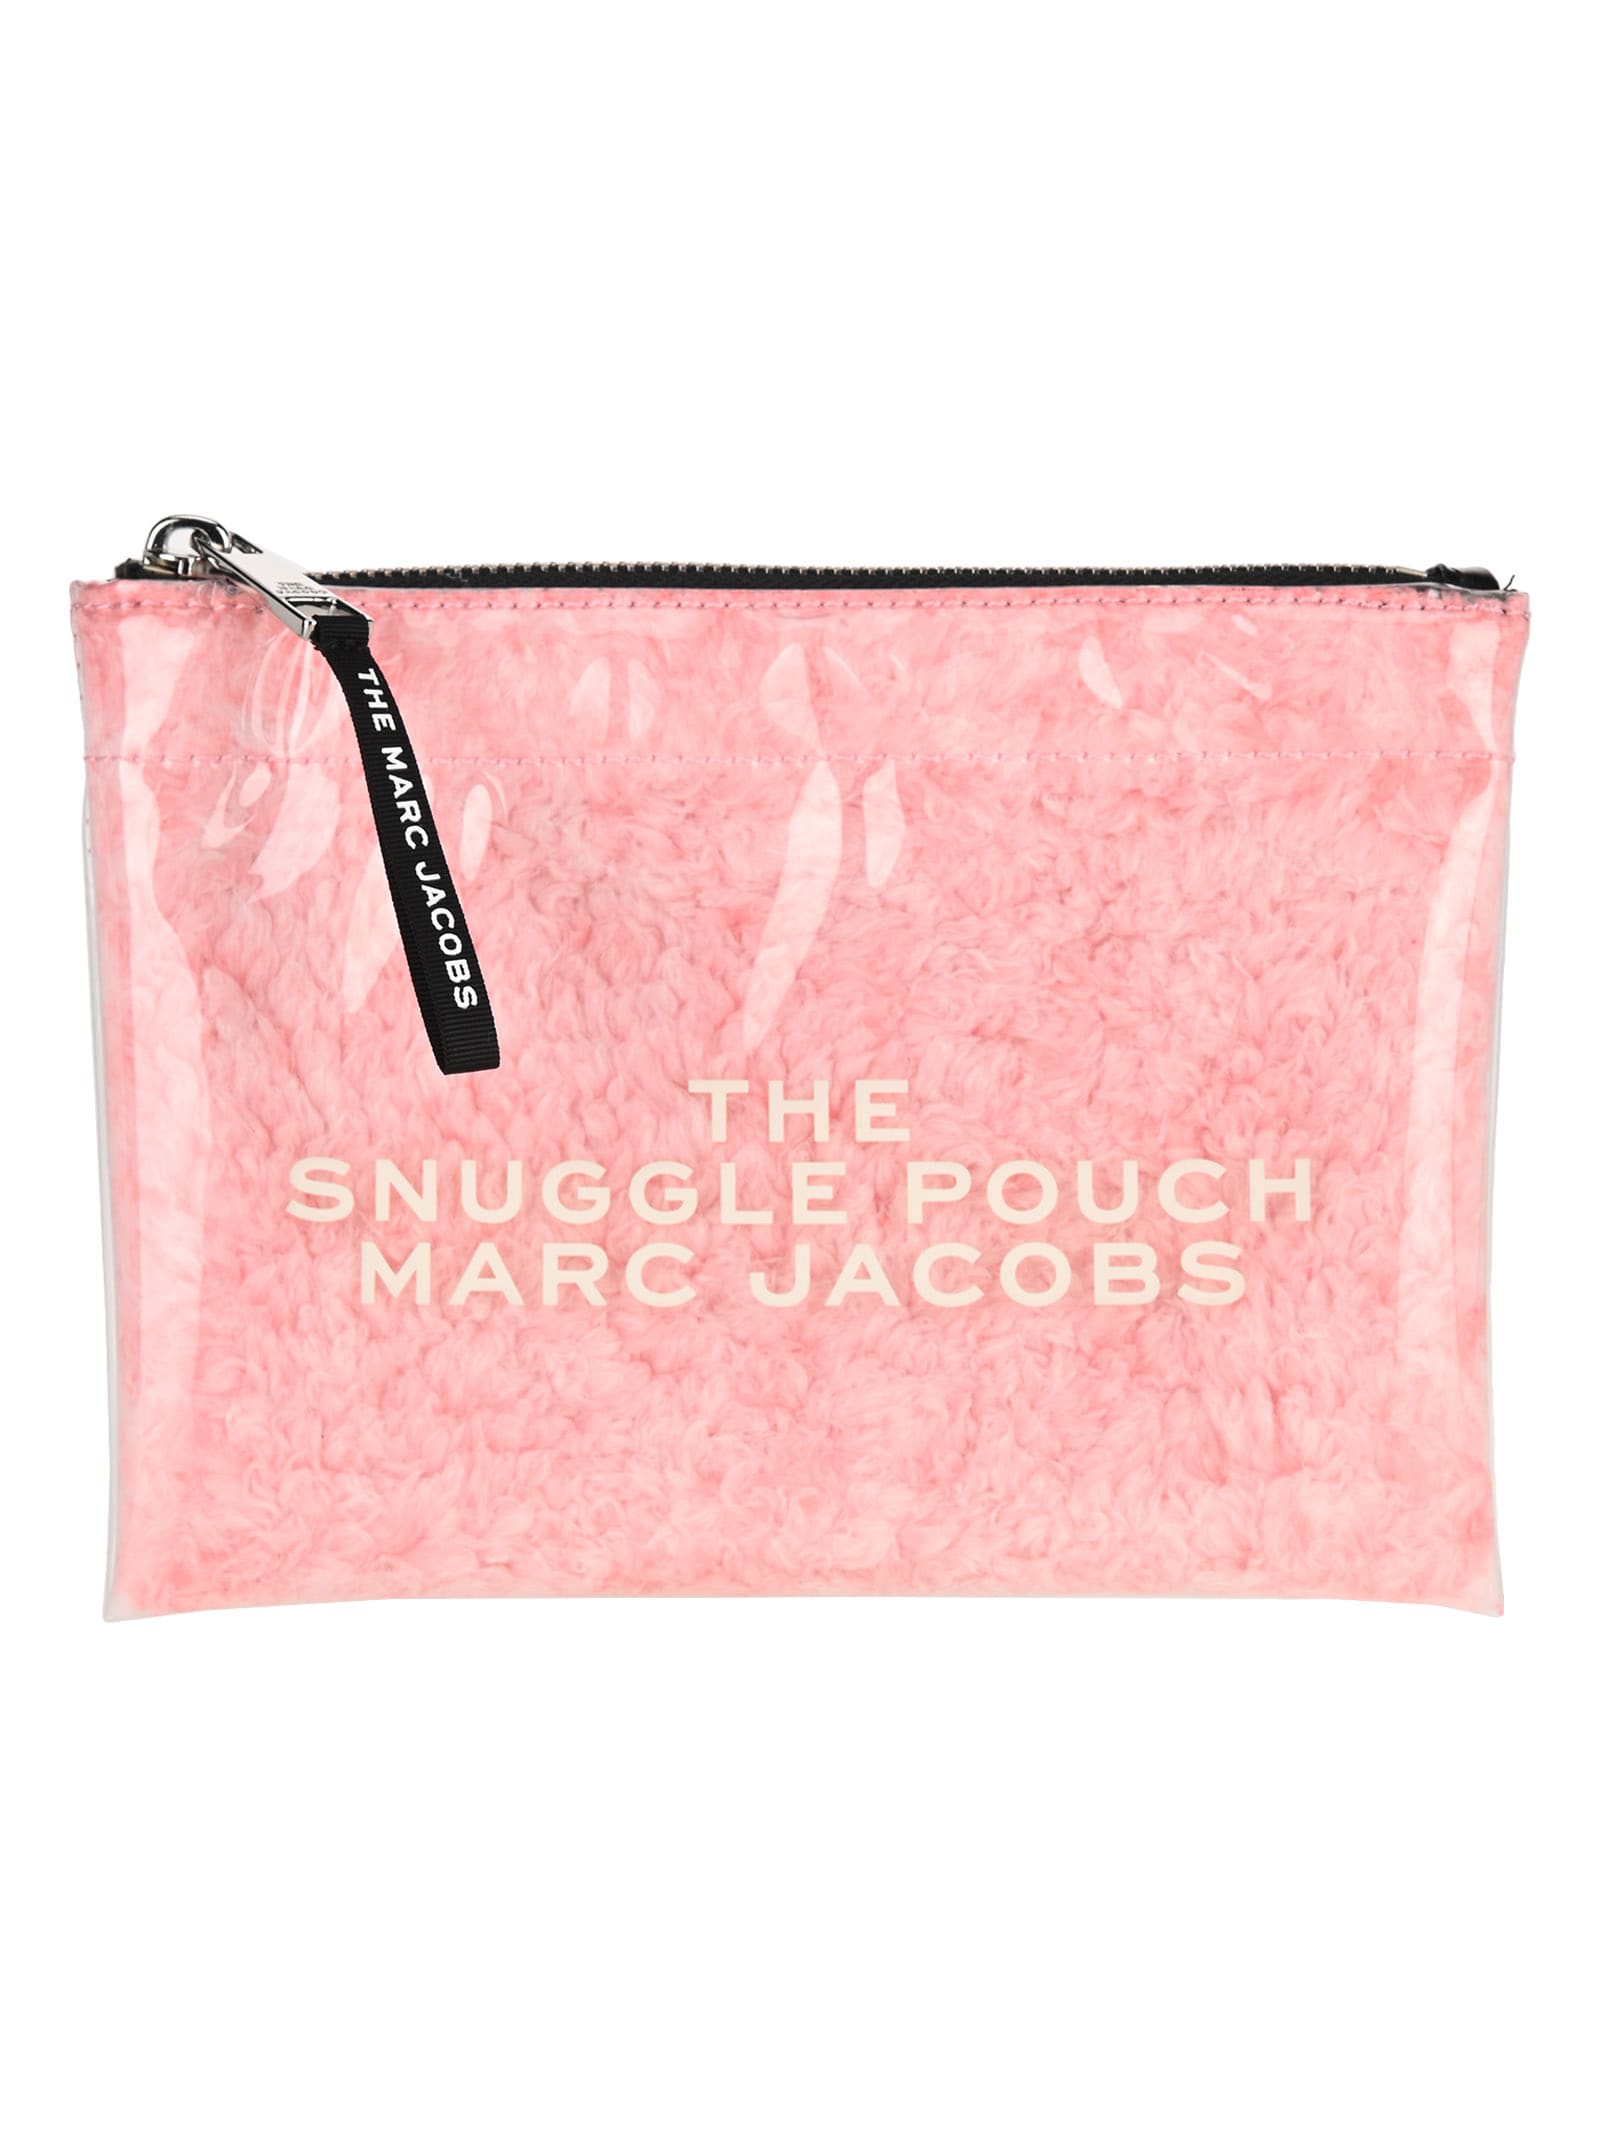 MARC JACOBS THE FLAT SNUGGLE POUCH,11270712